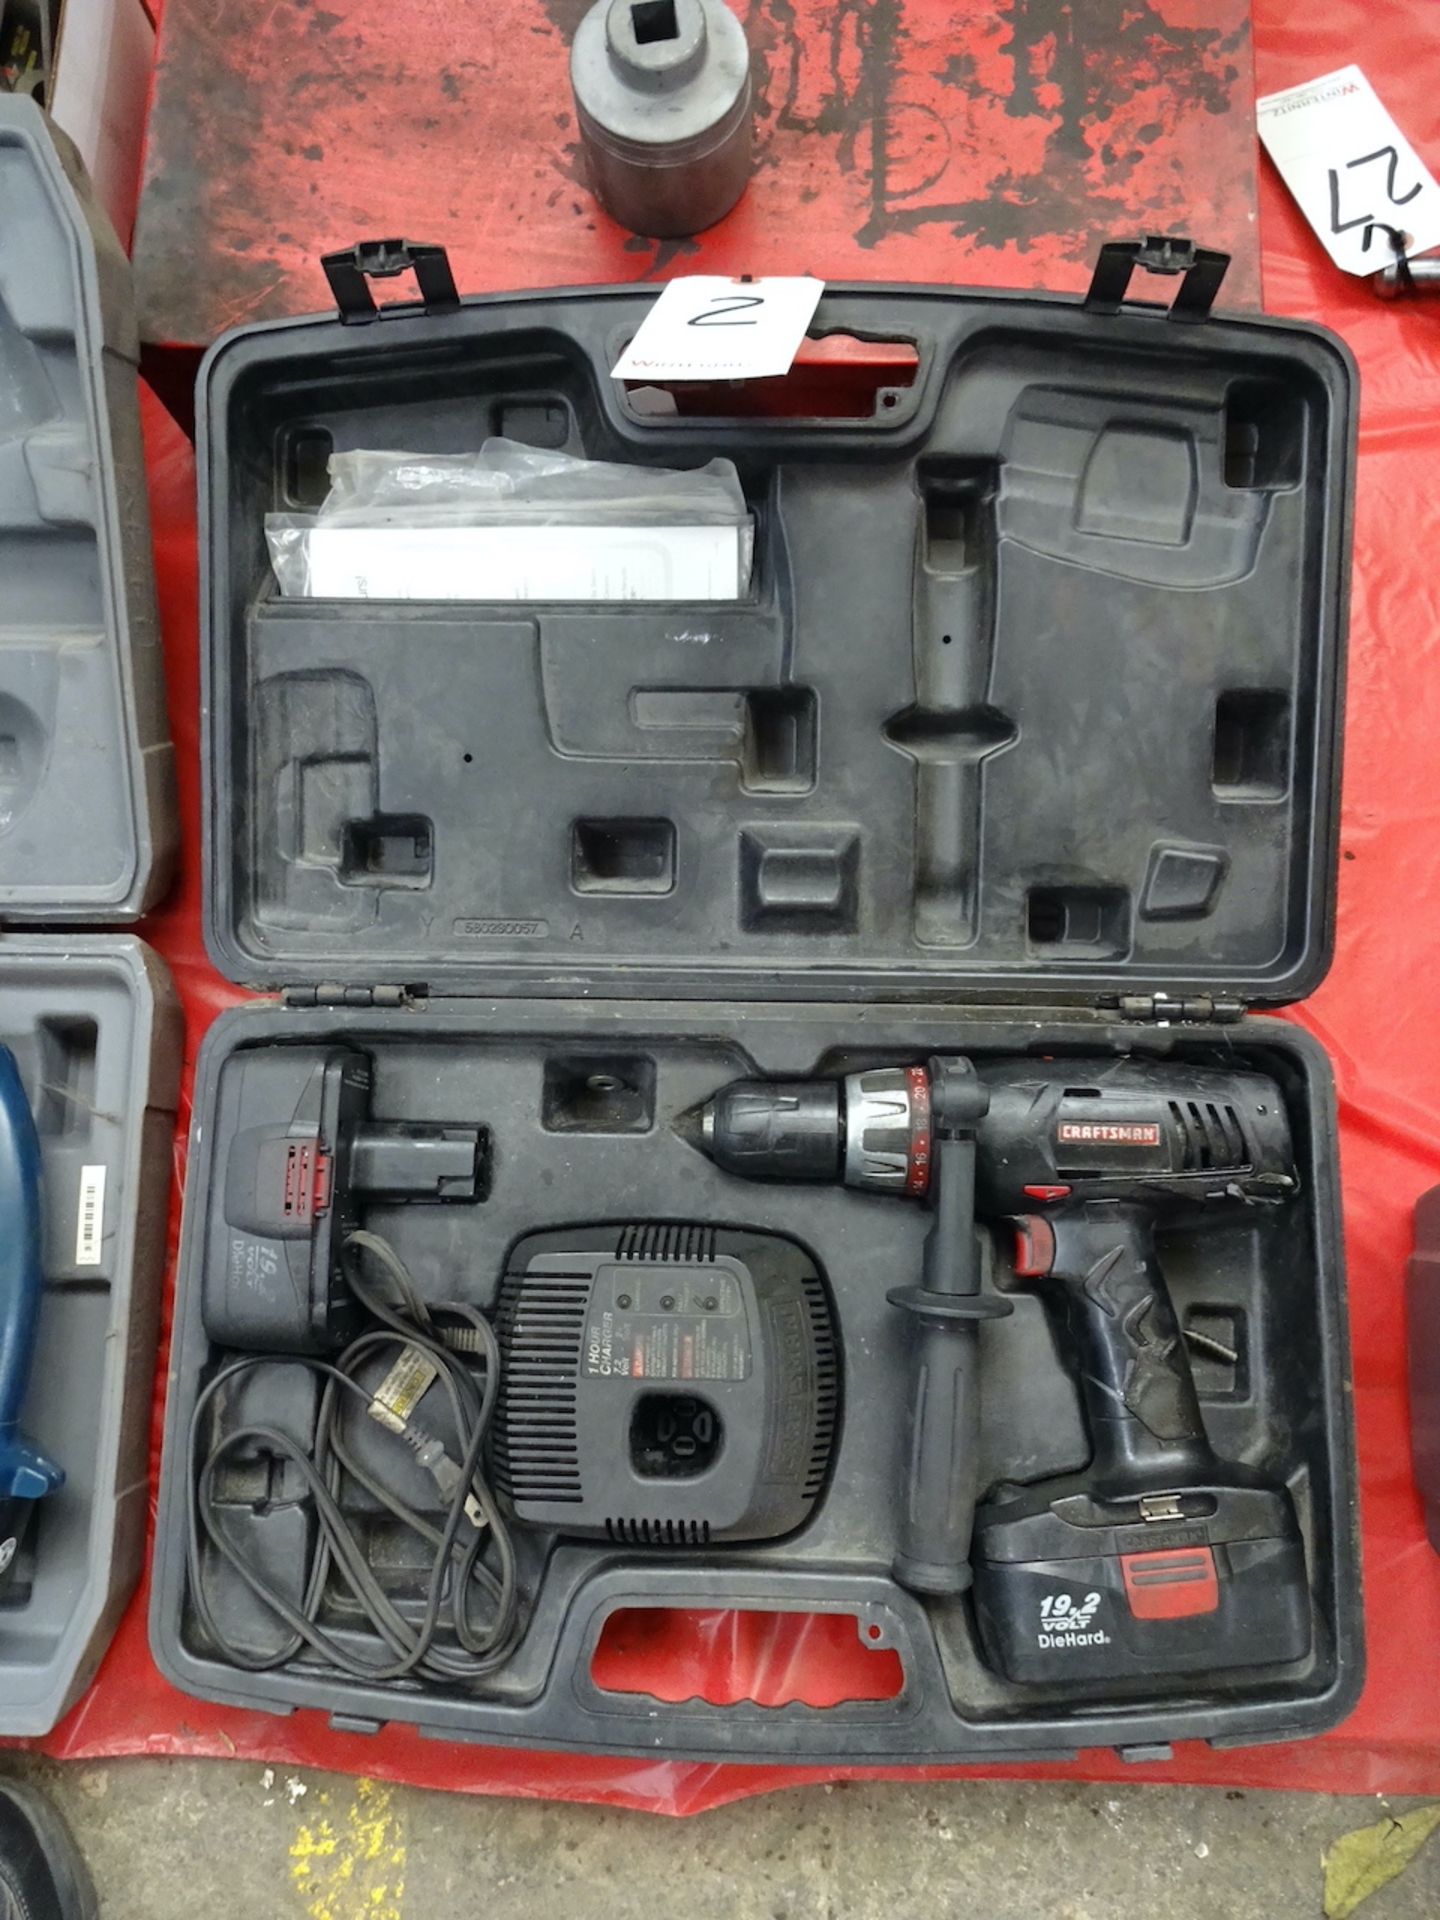 Craftsman 1/2 in. Cordless Drill/Driver